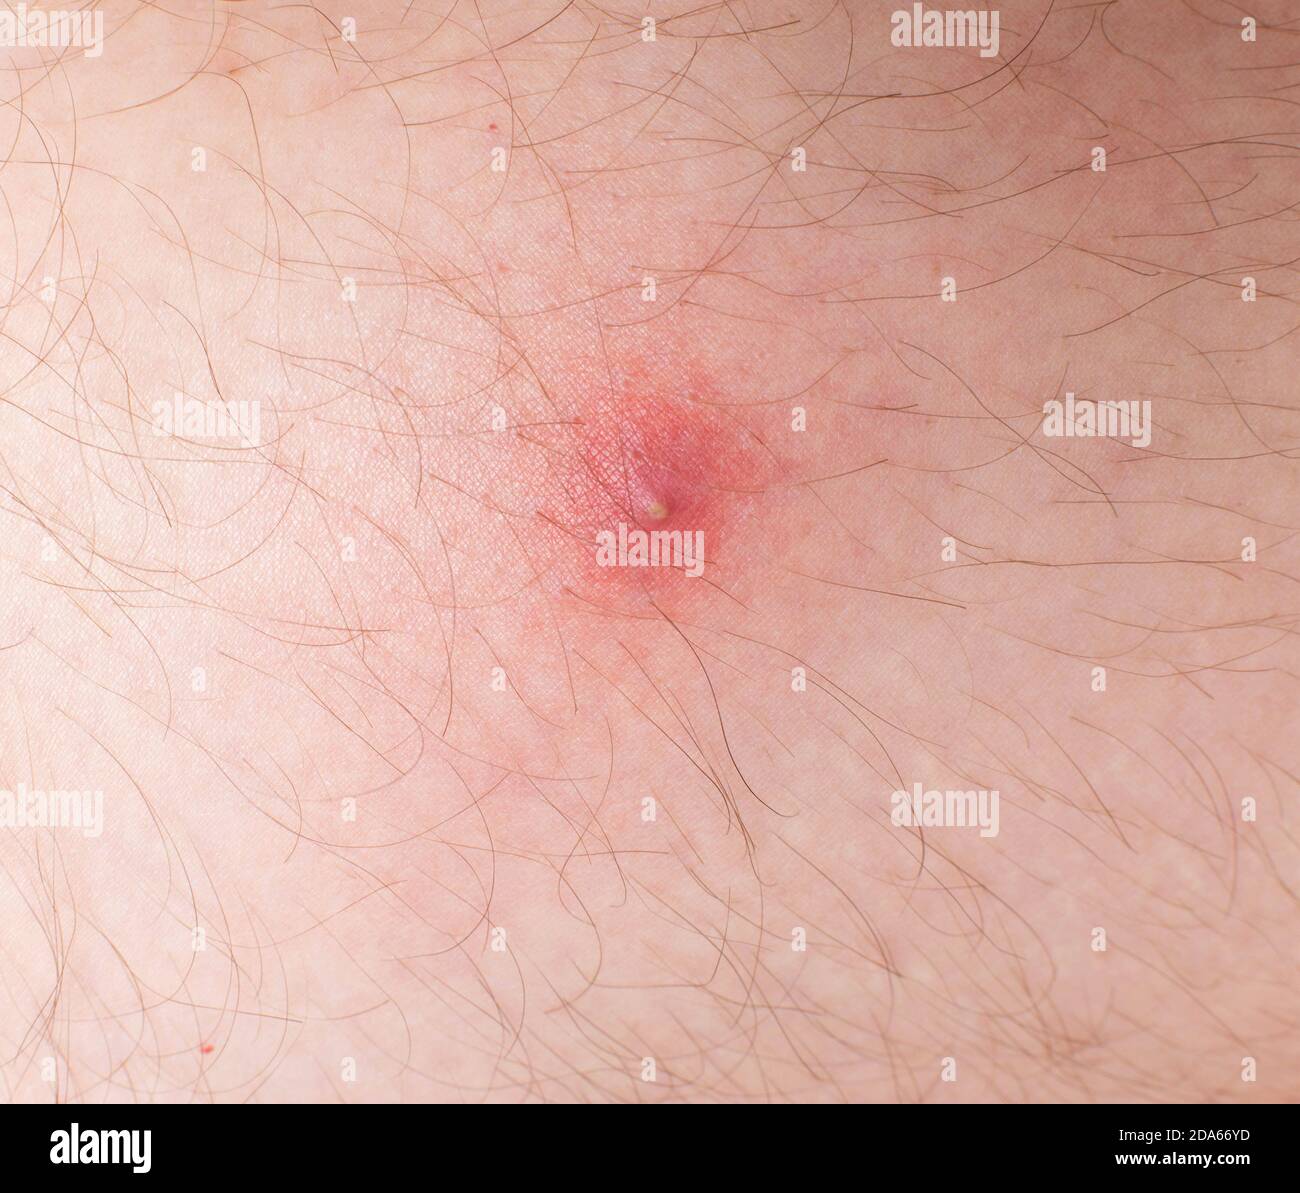 Red pimple on problem skin, close-up, hormone Stock Photo - Alamy